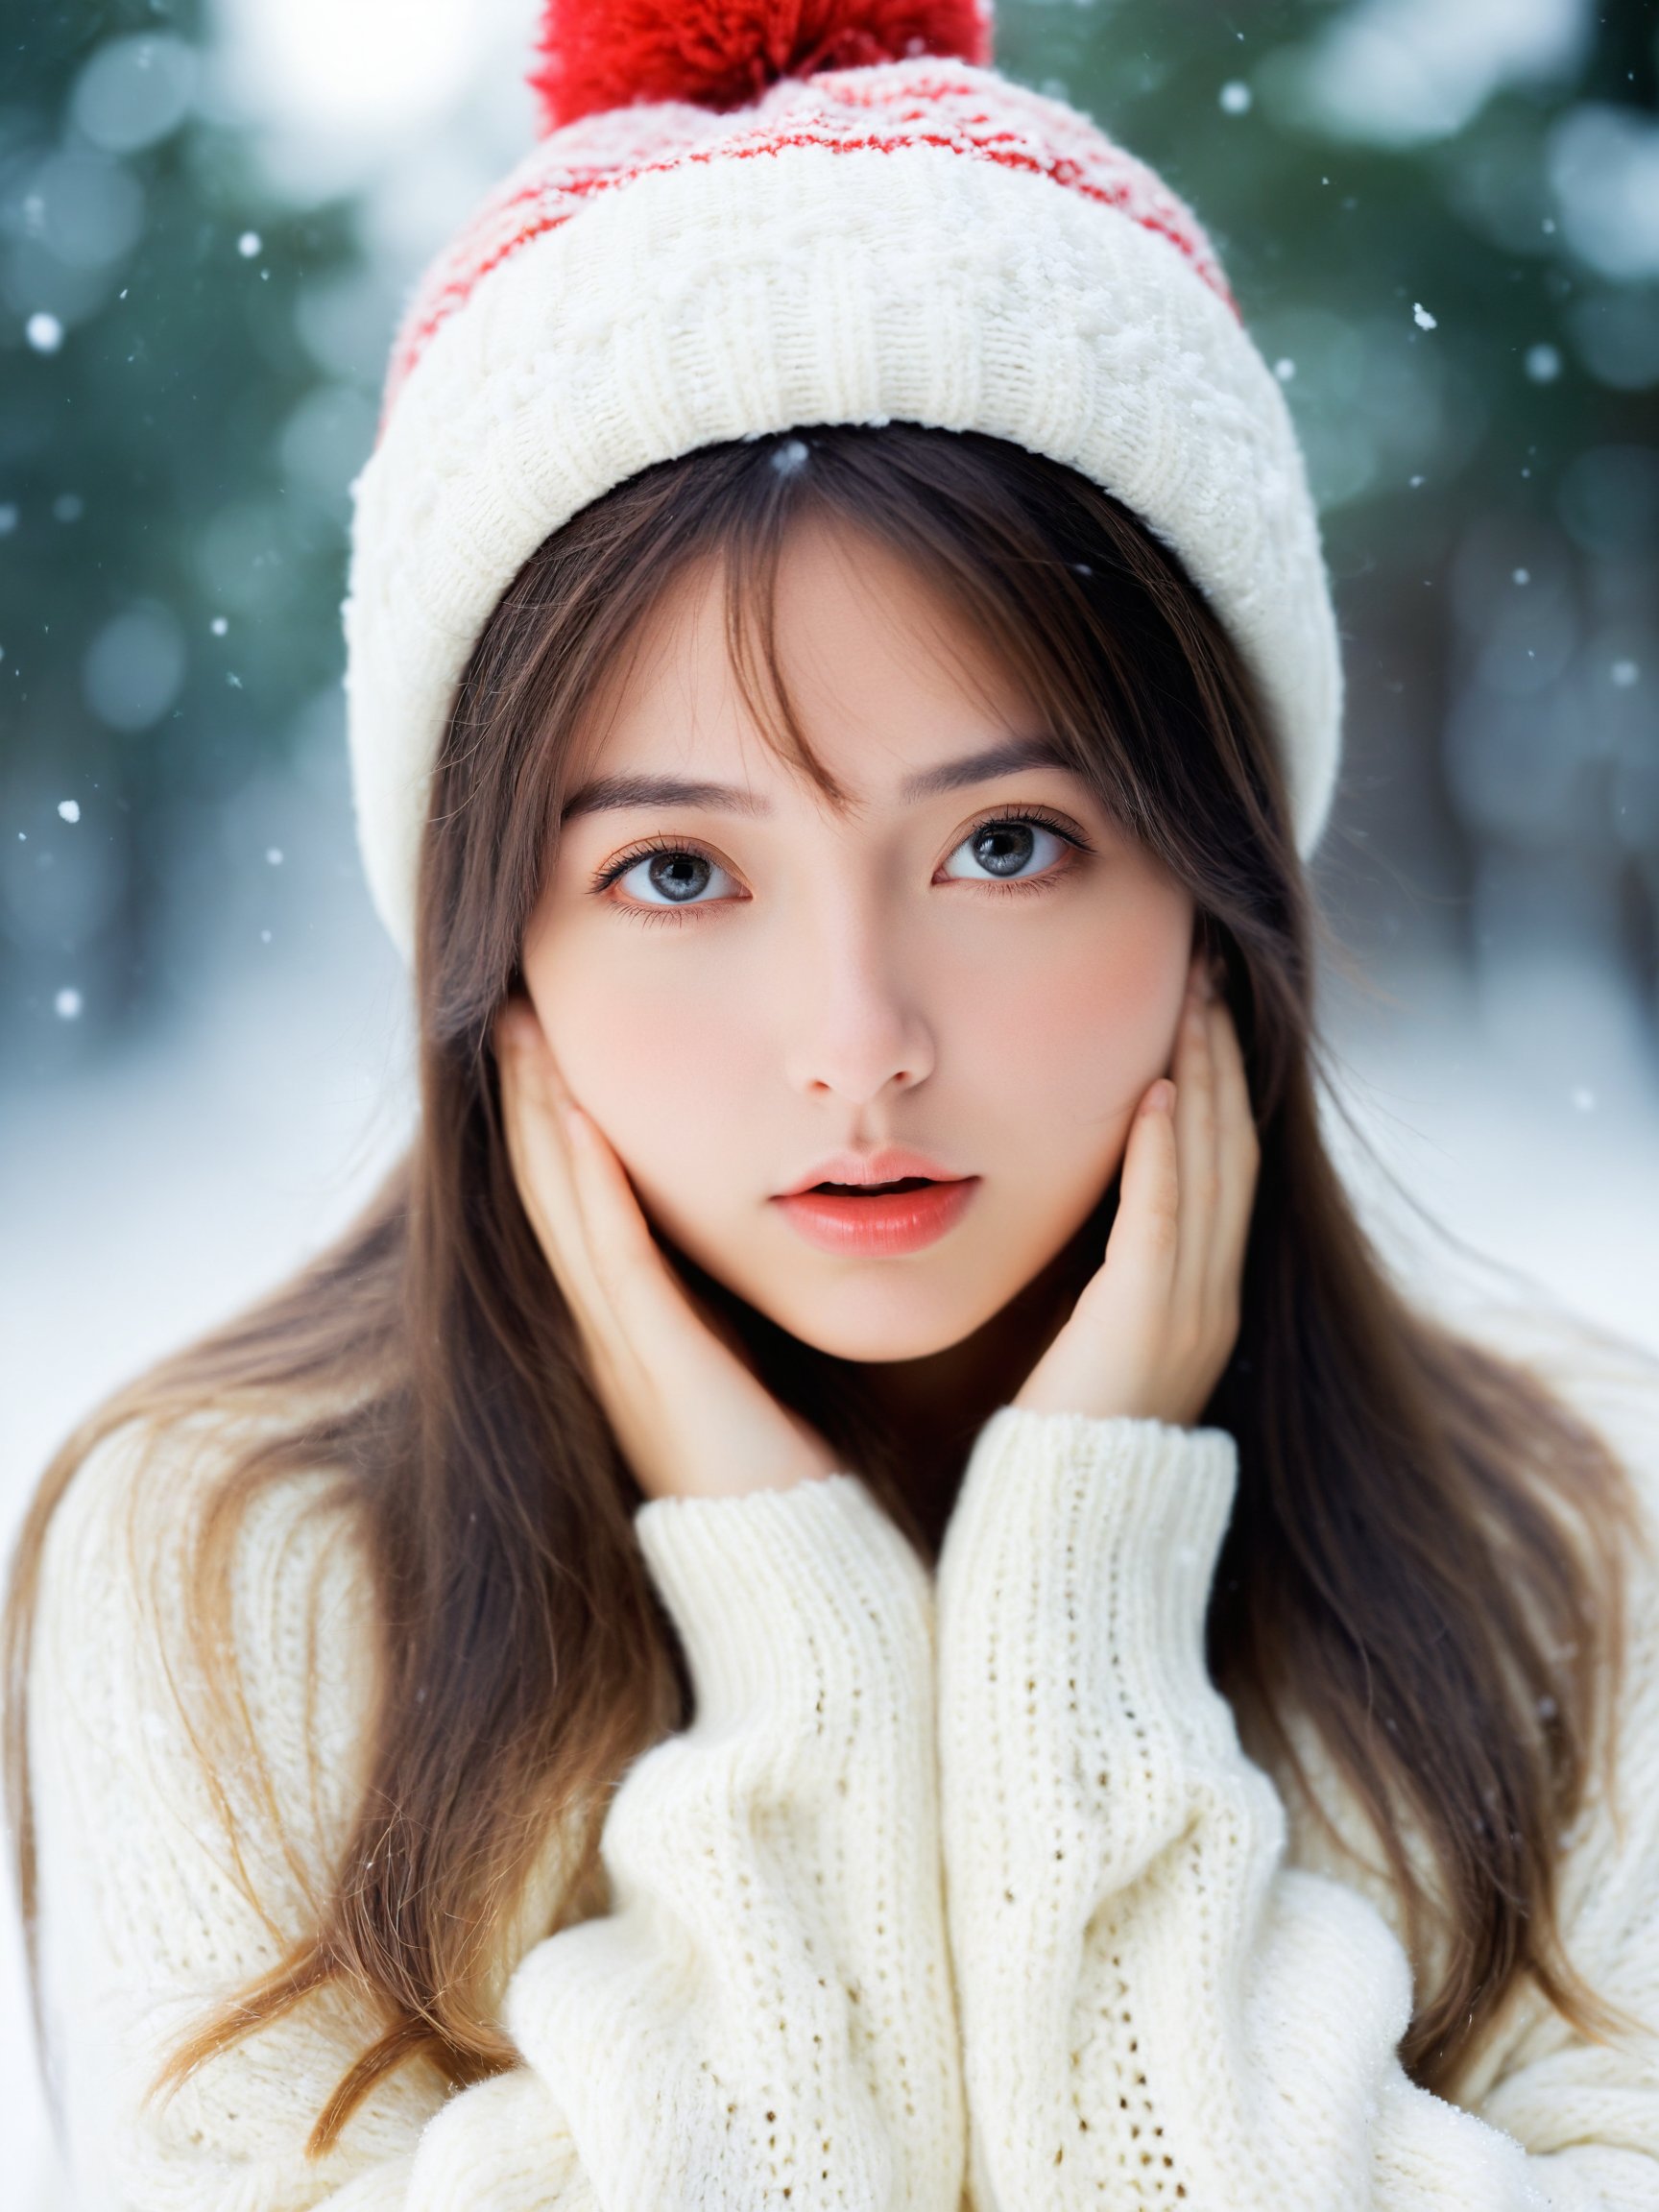 best quality, masterpiece,analogue photo of adult girl in sweater and sweater hat, looking at viewer, long hair, head shot, hold cheeks with hands, close-up, extremely beautiful detailed face, medium breasts, (cute face, temptations look), eye level,professional photo, high contrast exposure, soft bokeh, high key light, hard shadow, soft bokeh, snowing, snowing background,